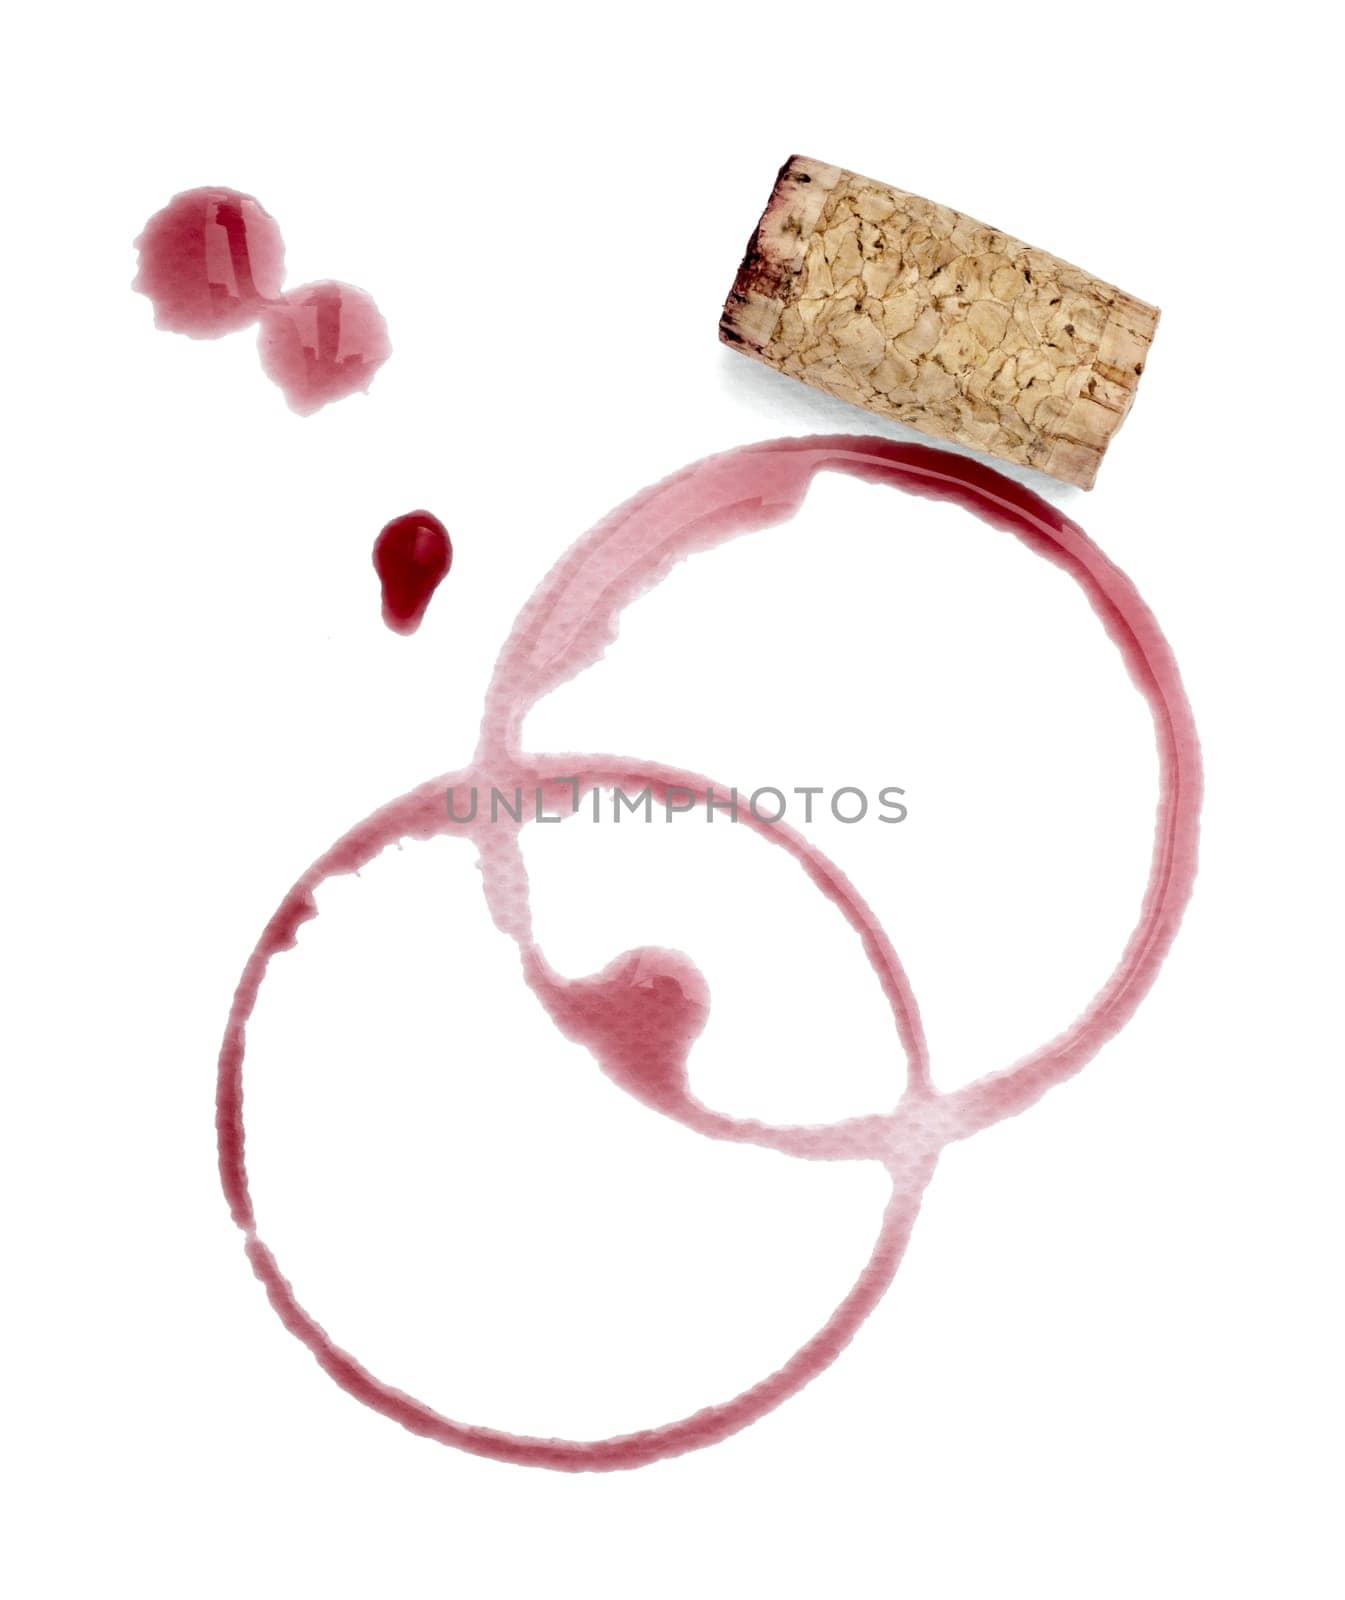 close up of a wine stain and corkscrew and cork cap on white background